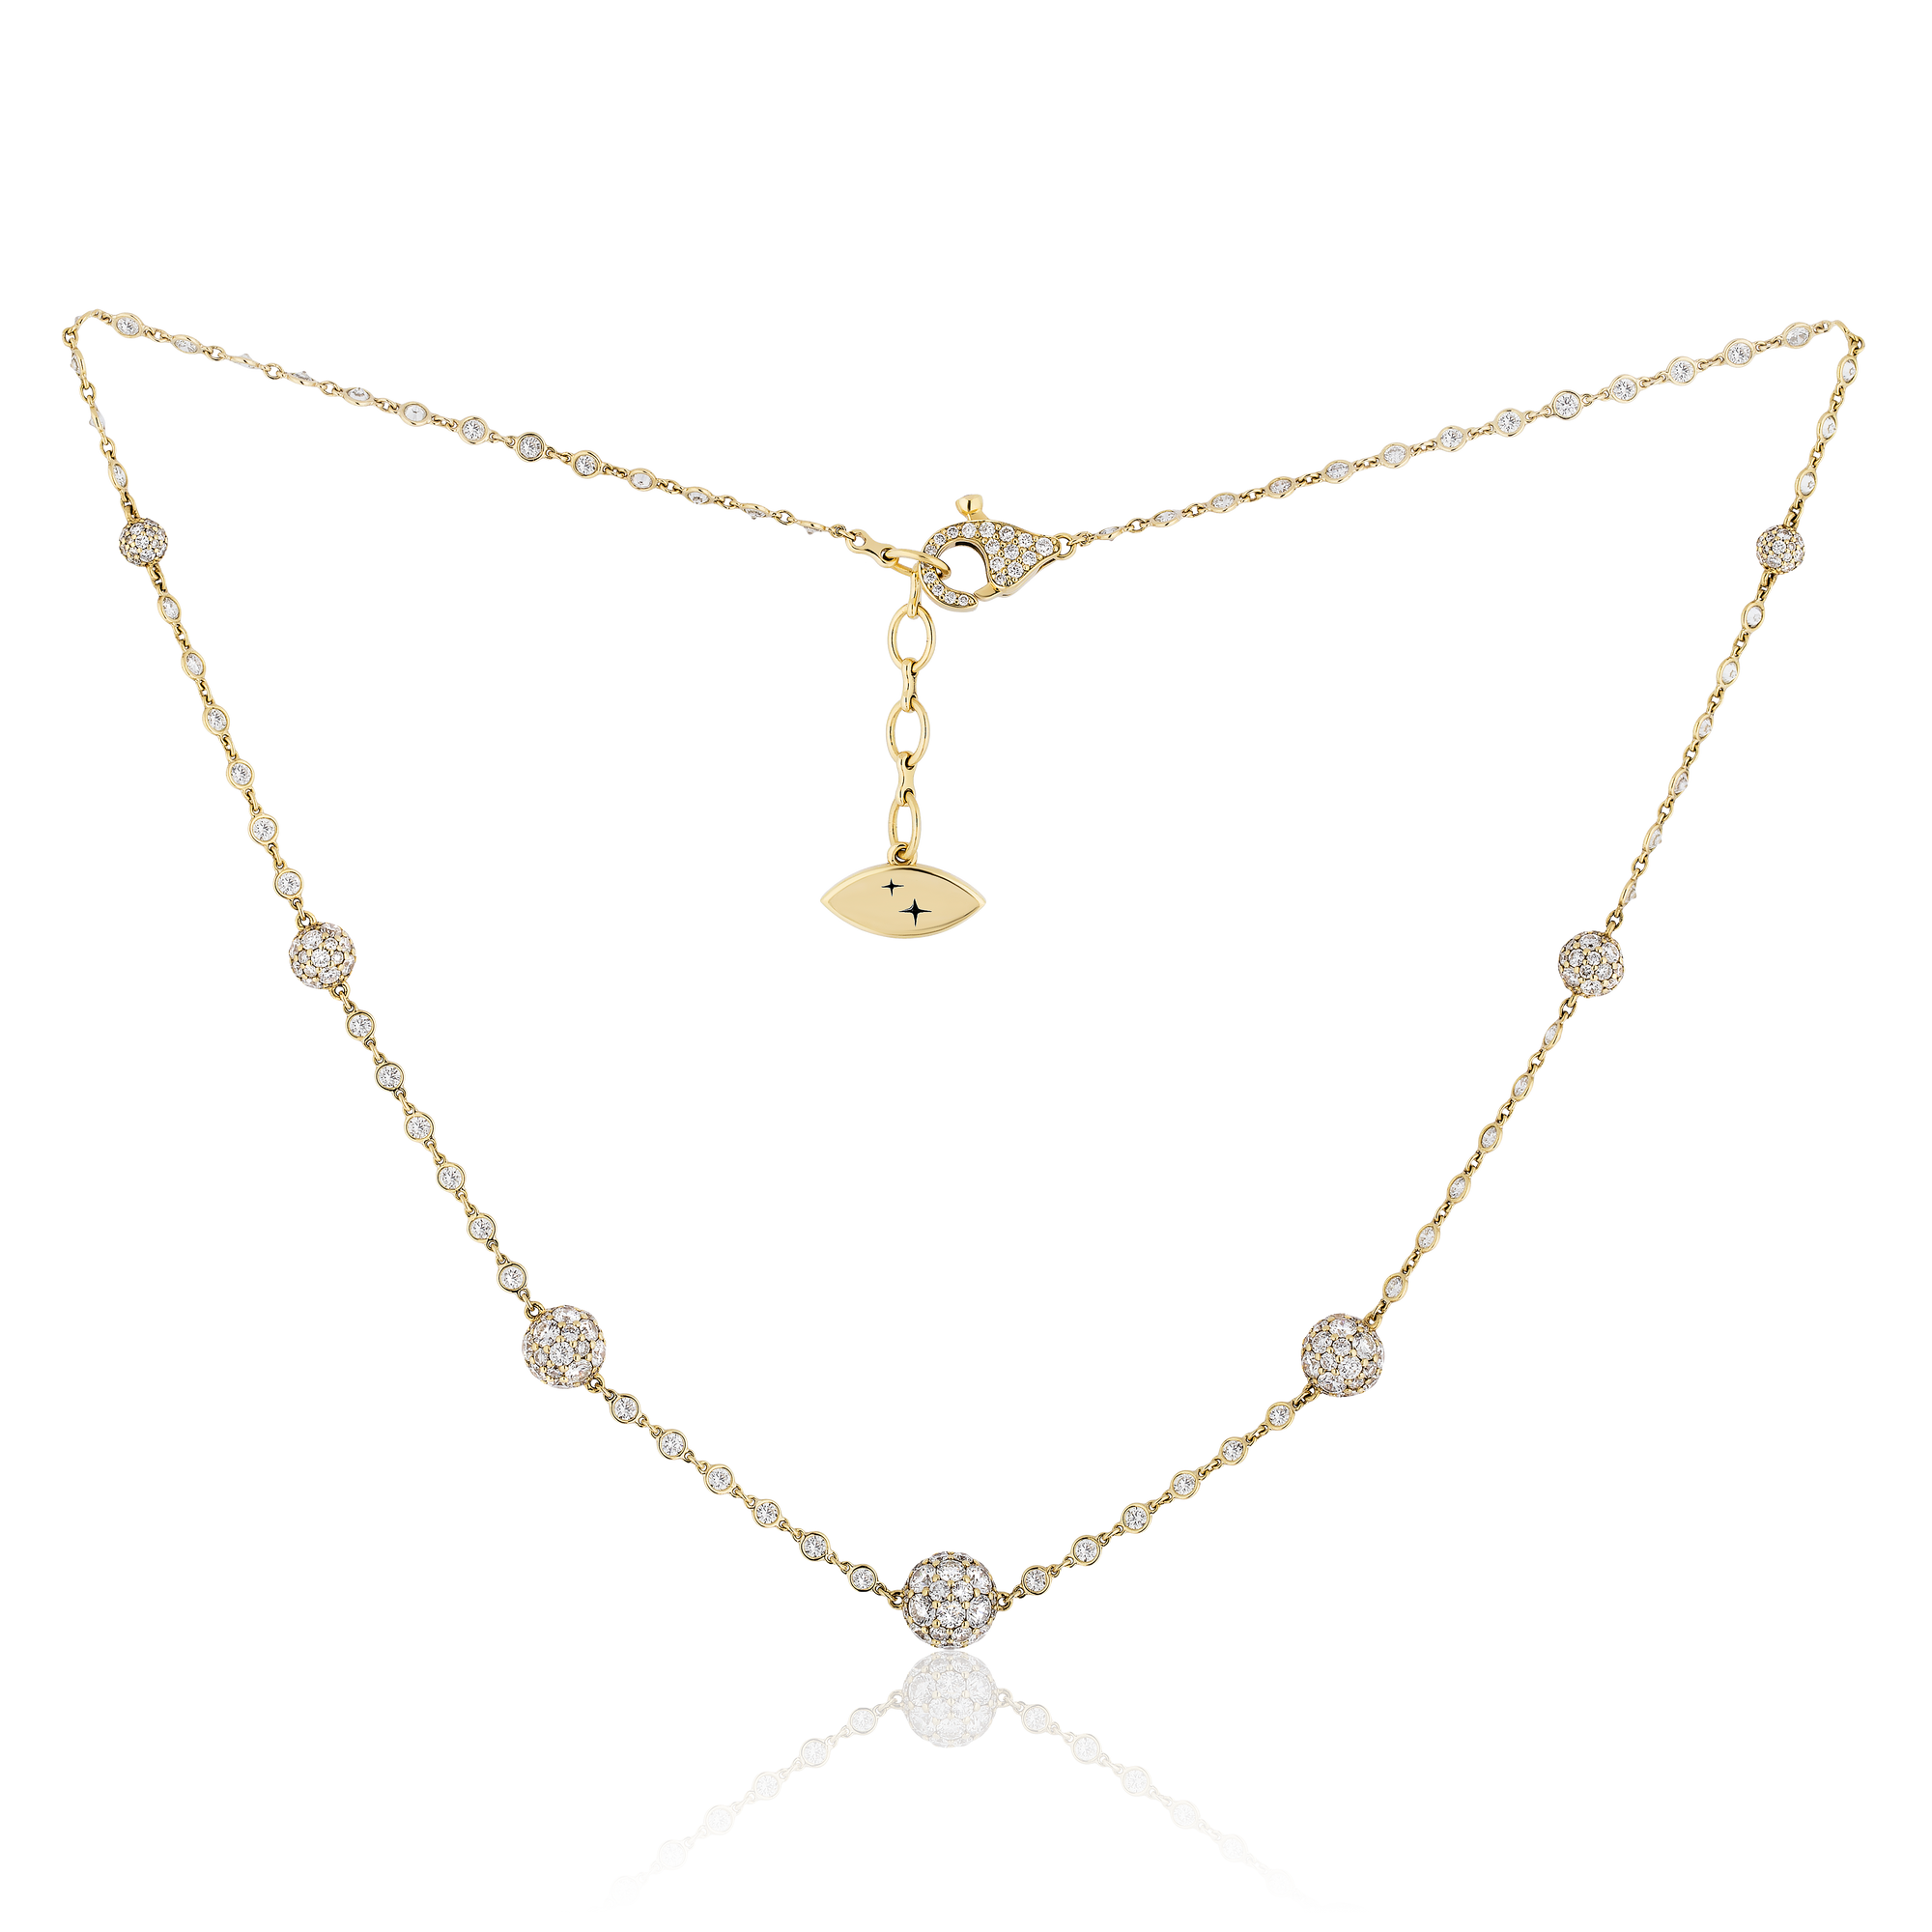 Celestial Graduating Charm Necklace with Spoiled Chain